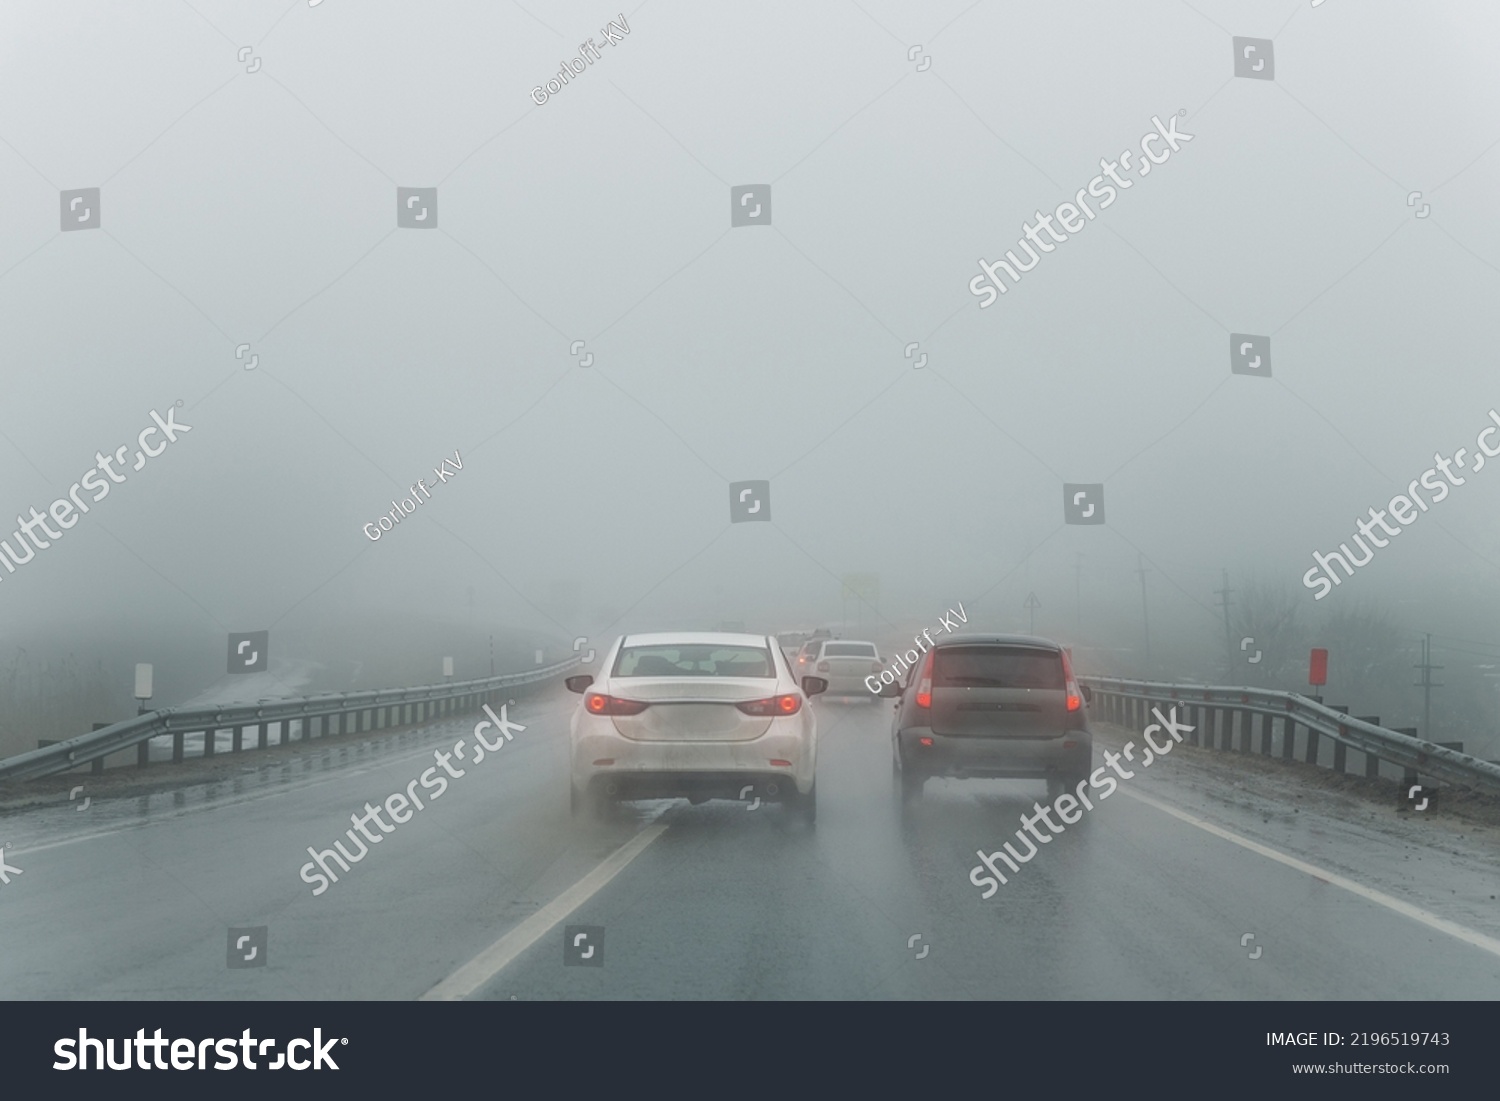 Car overtake rules violation crossing double lane. traffic on foggy misty rainy highway intercity road low poor visibility cold winter autumn day. Seasonal bad rainy weather accident danger warning #2196519743